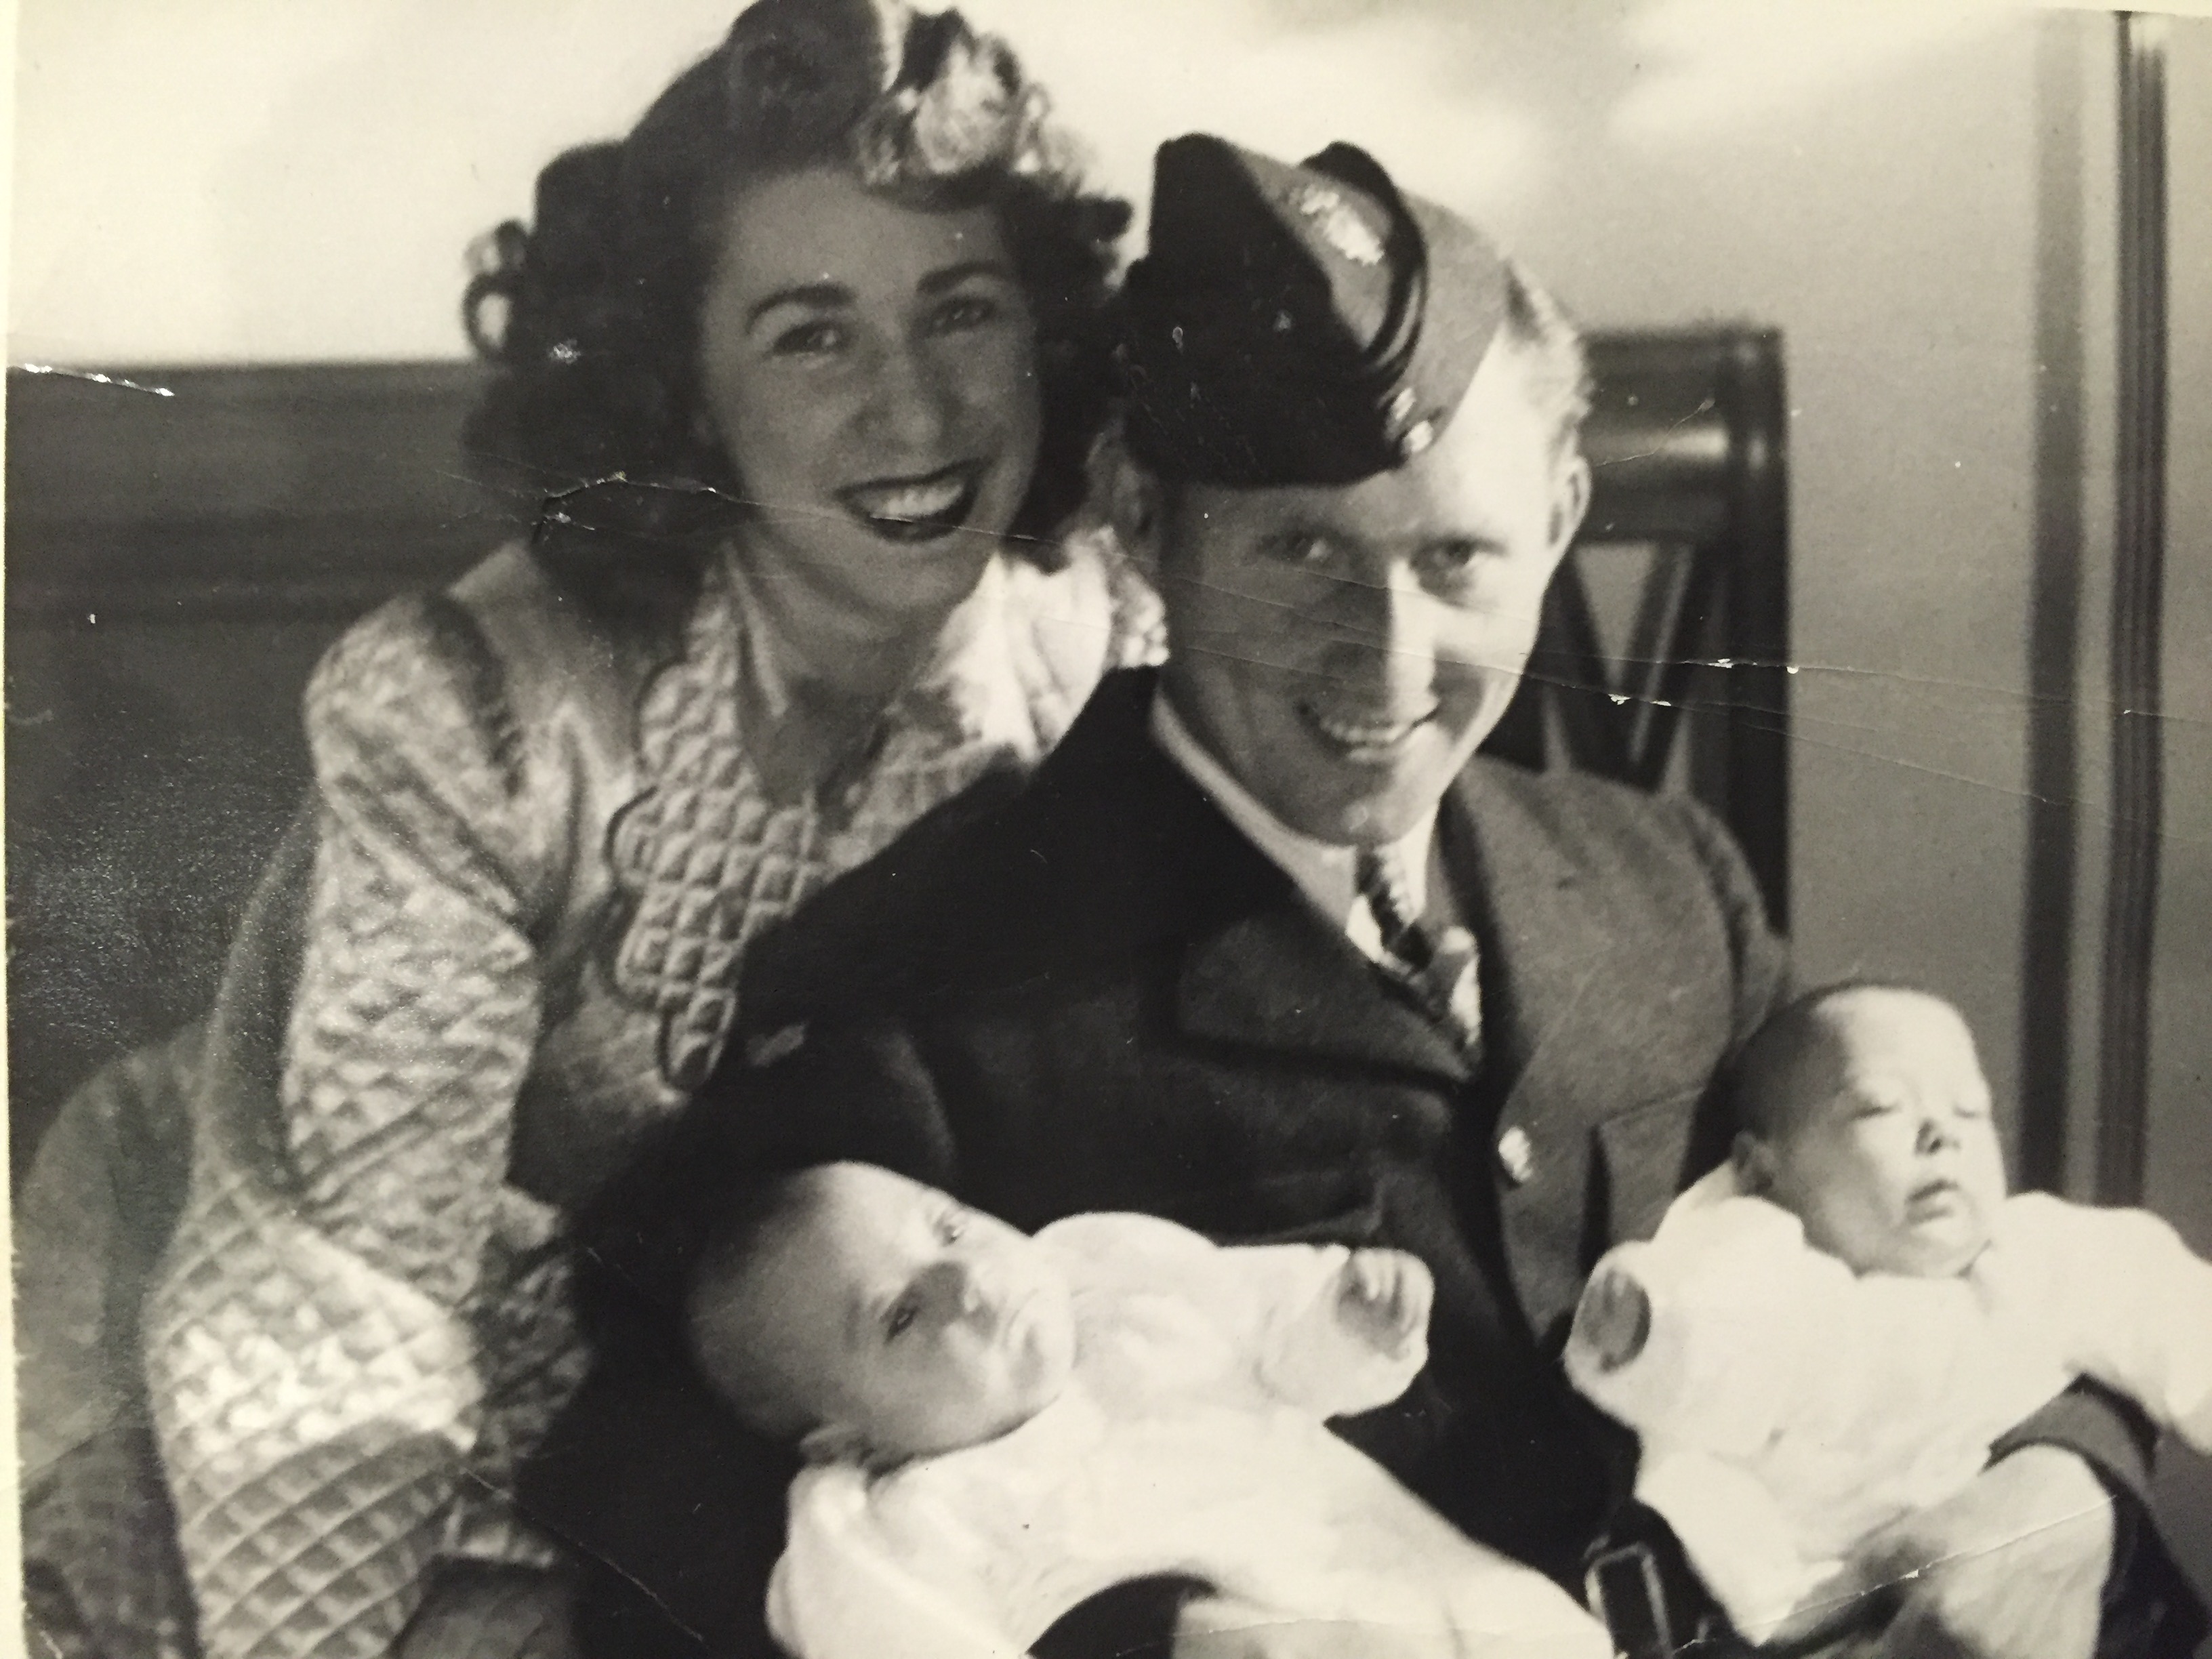 "Womb-mates" Jay and Ed Keystone with their parents in 1943